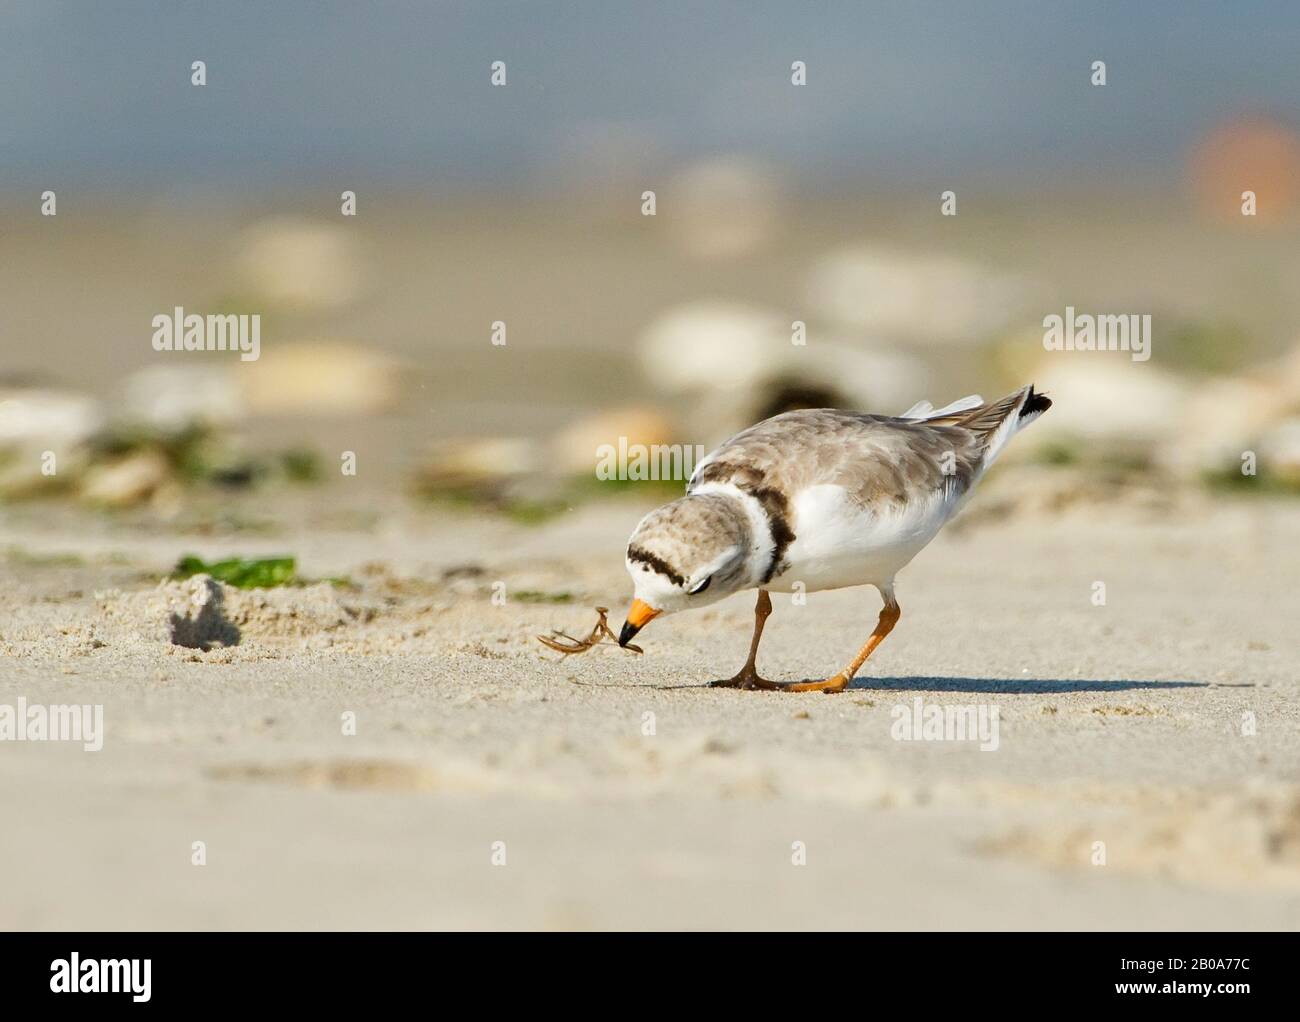 Piping plover s foraging in beach habitat with preying mantis prey Stock Photo